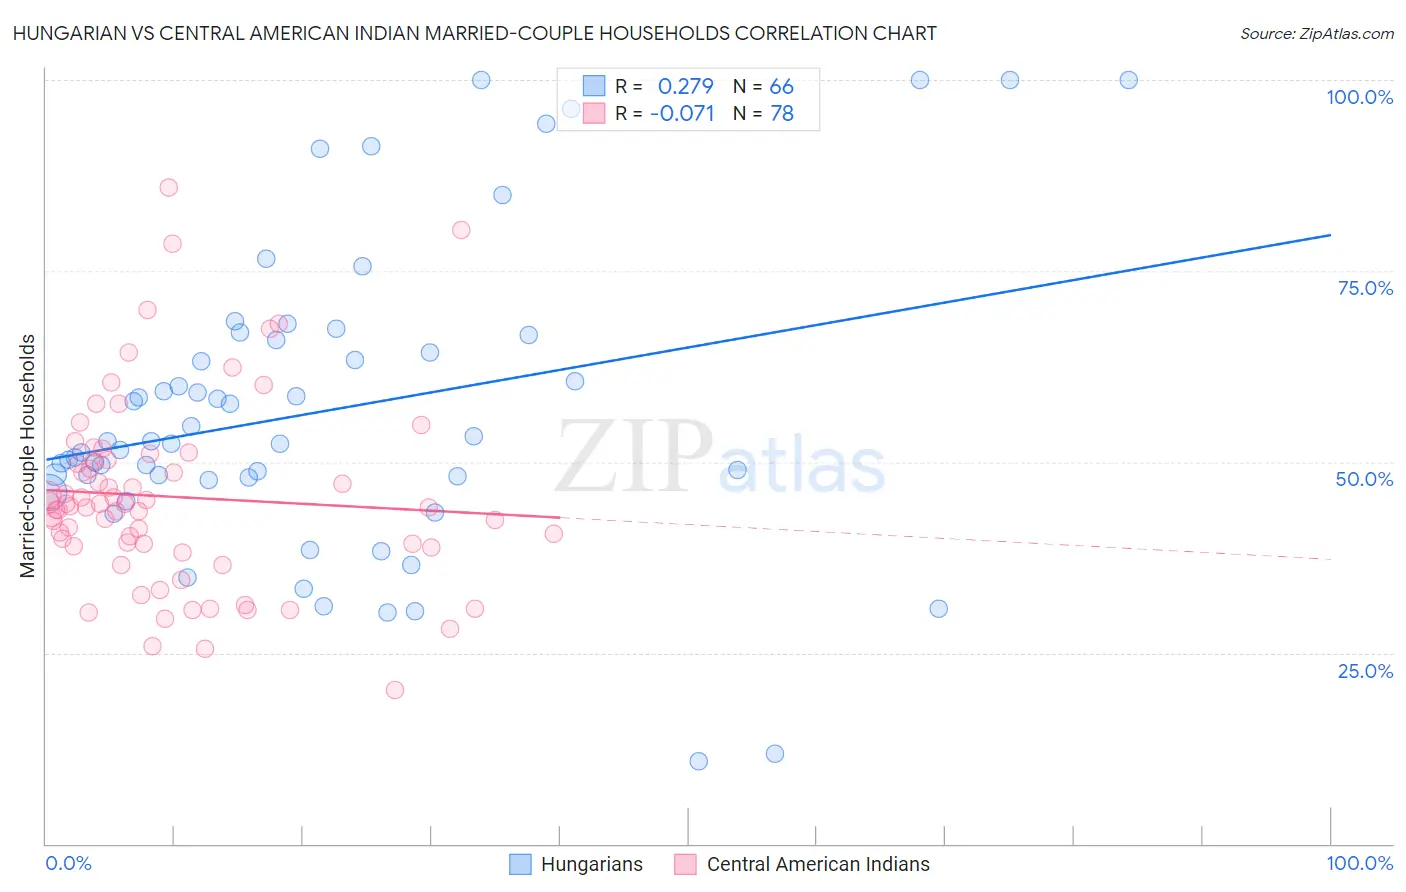 Hungarian vs Central American Indian Married-couple Households